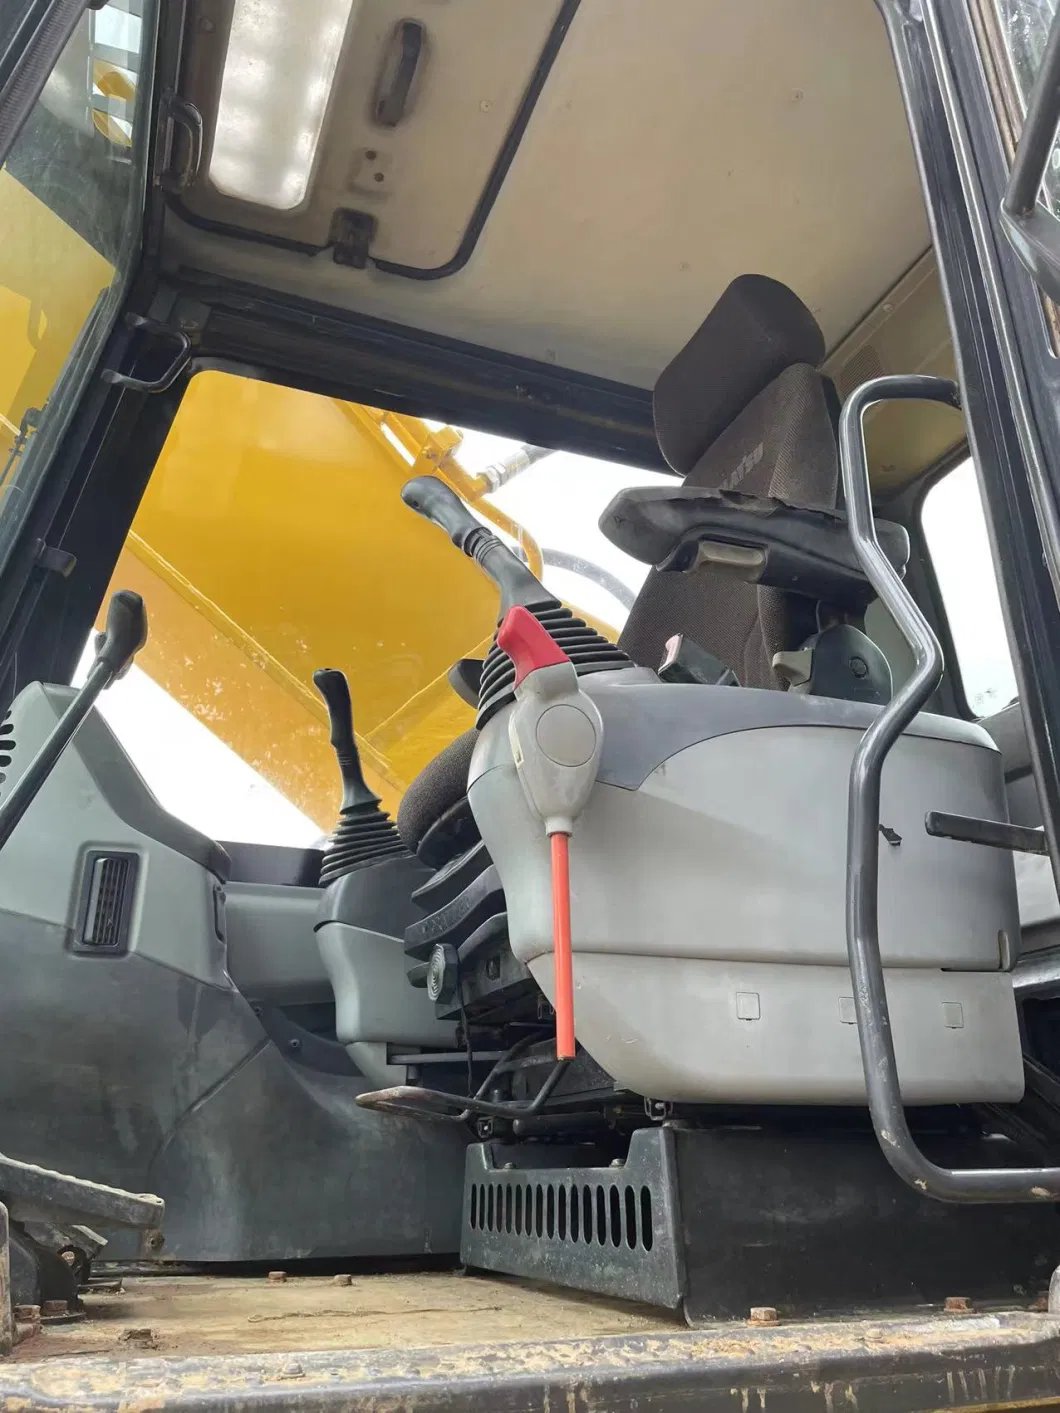 High Quality Komatsu PC400-8 with Good Working Condition Used Excavator for Sale